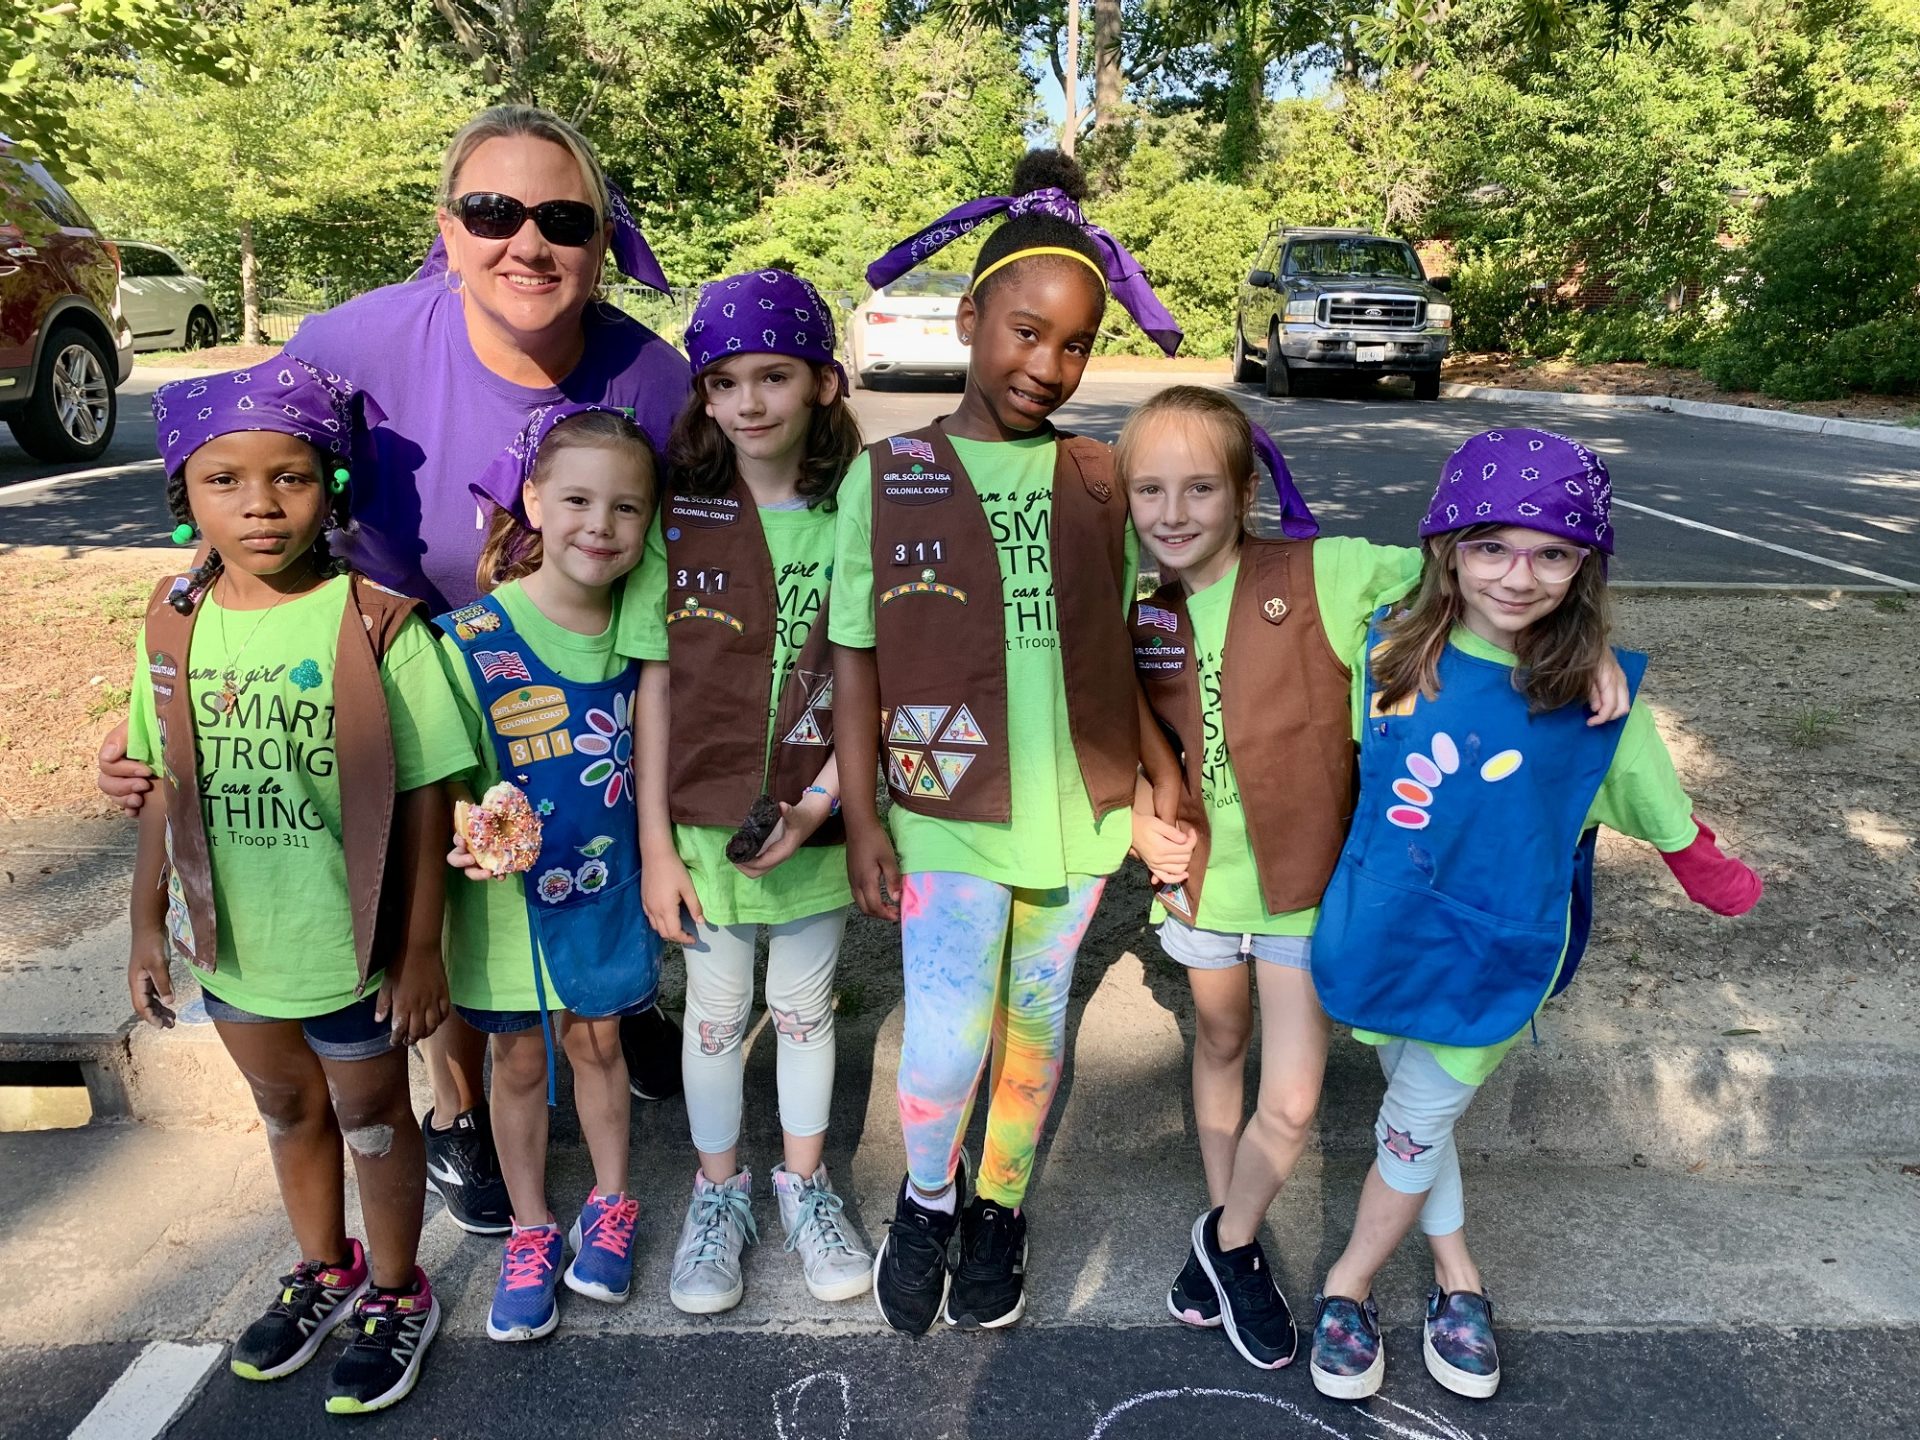 Girl Scout Daisies and Brownies with their troop leader posing for a photo outdoors at a charity run event